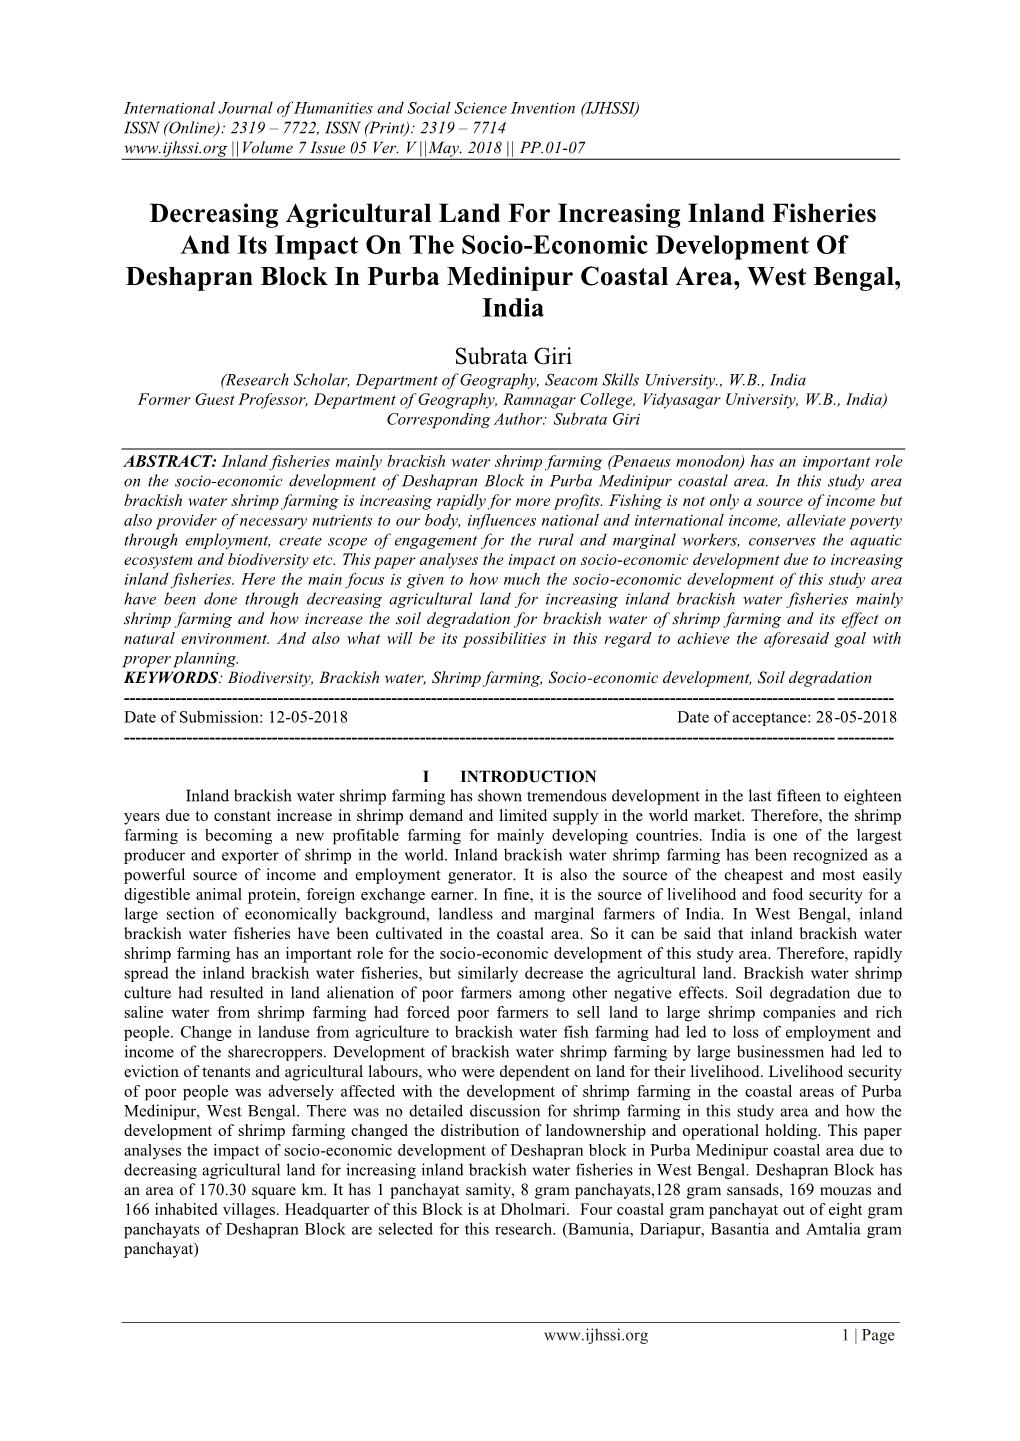 Decreasing Agricultural Land for Increasing Inland Fisheries and Its